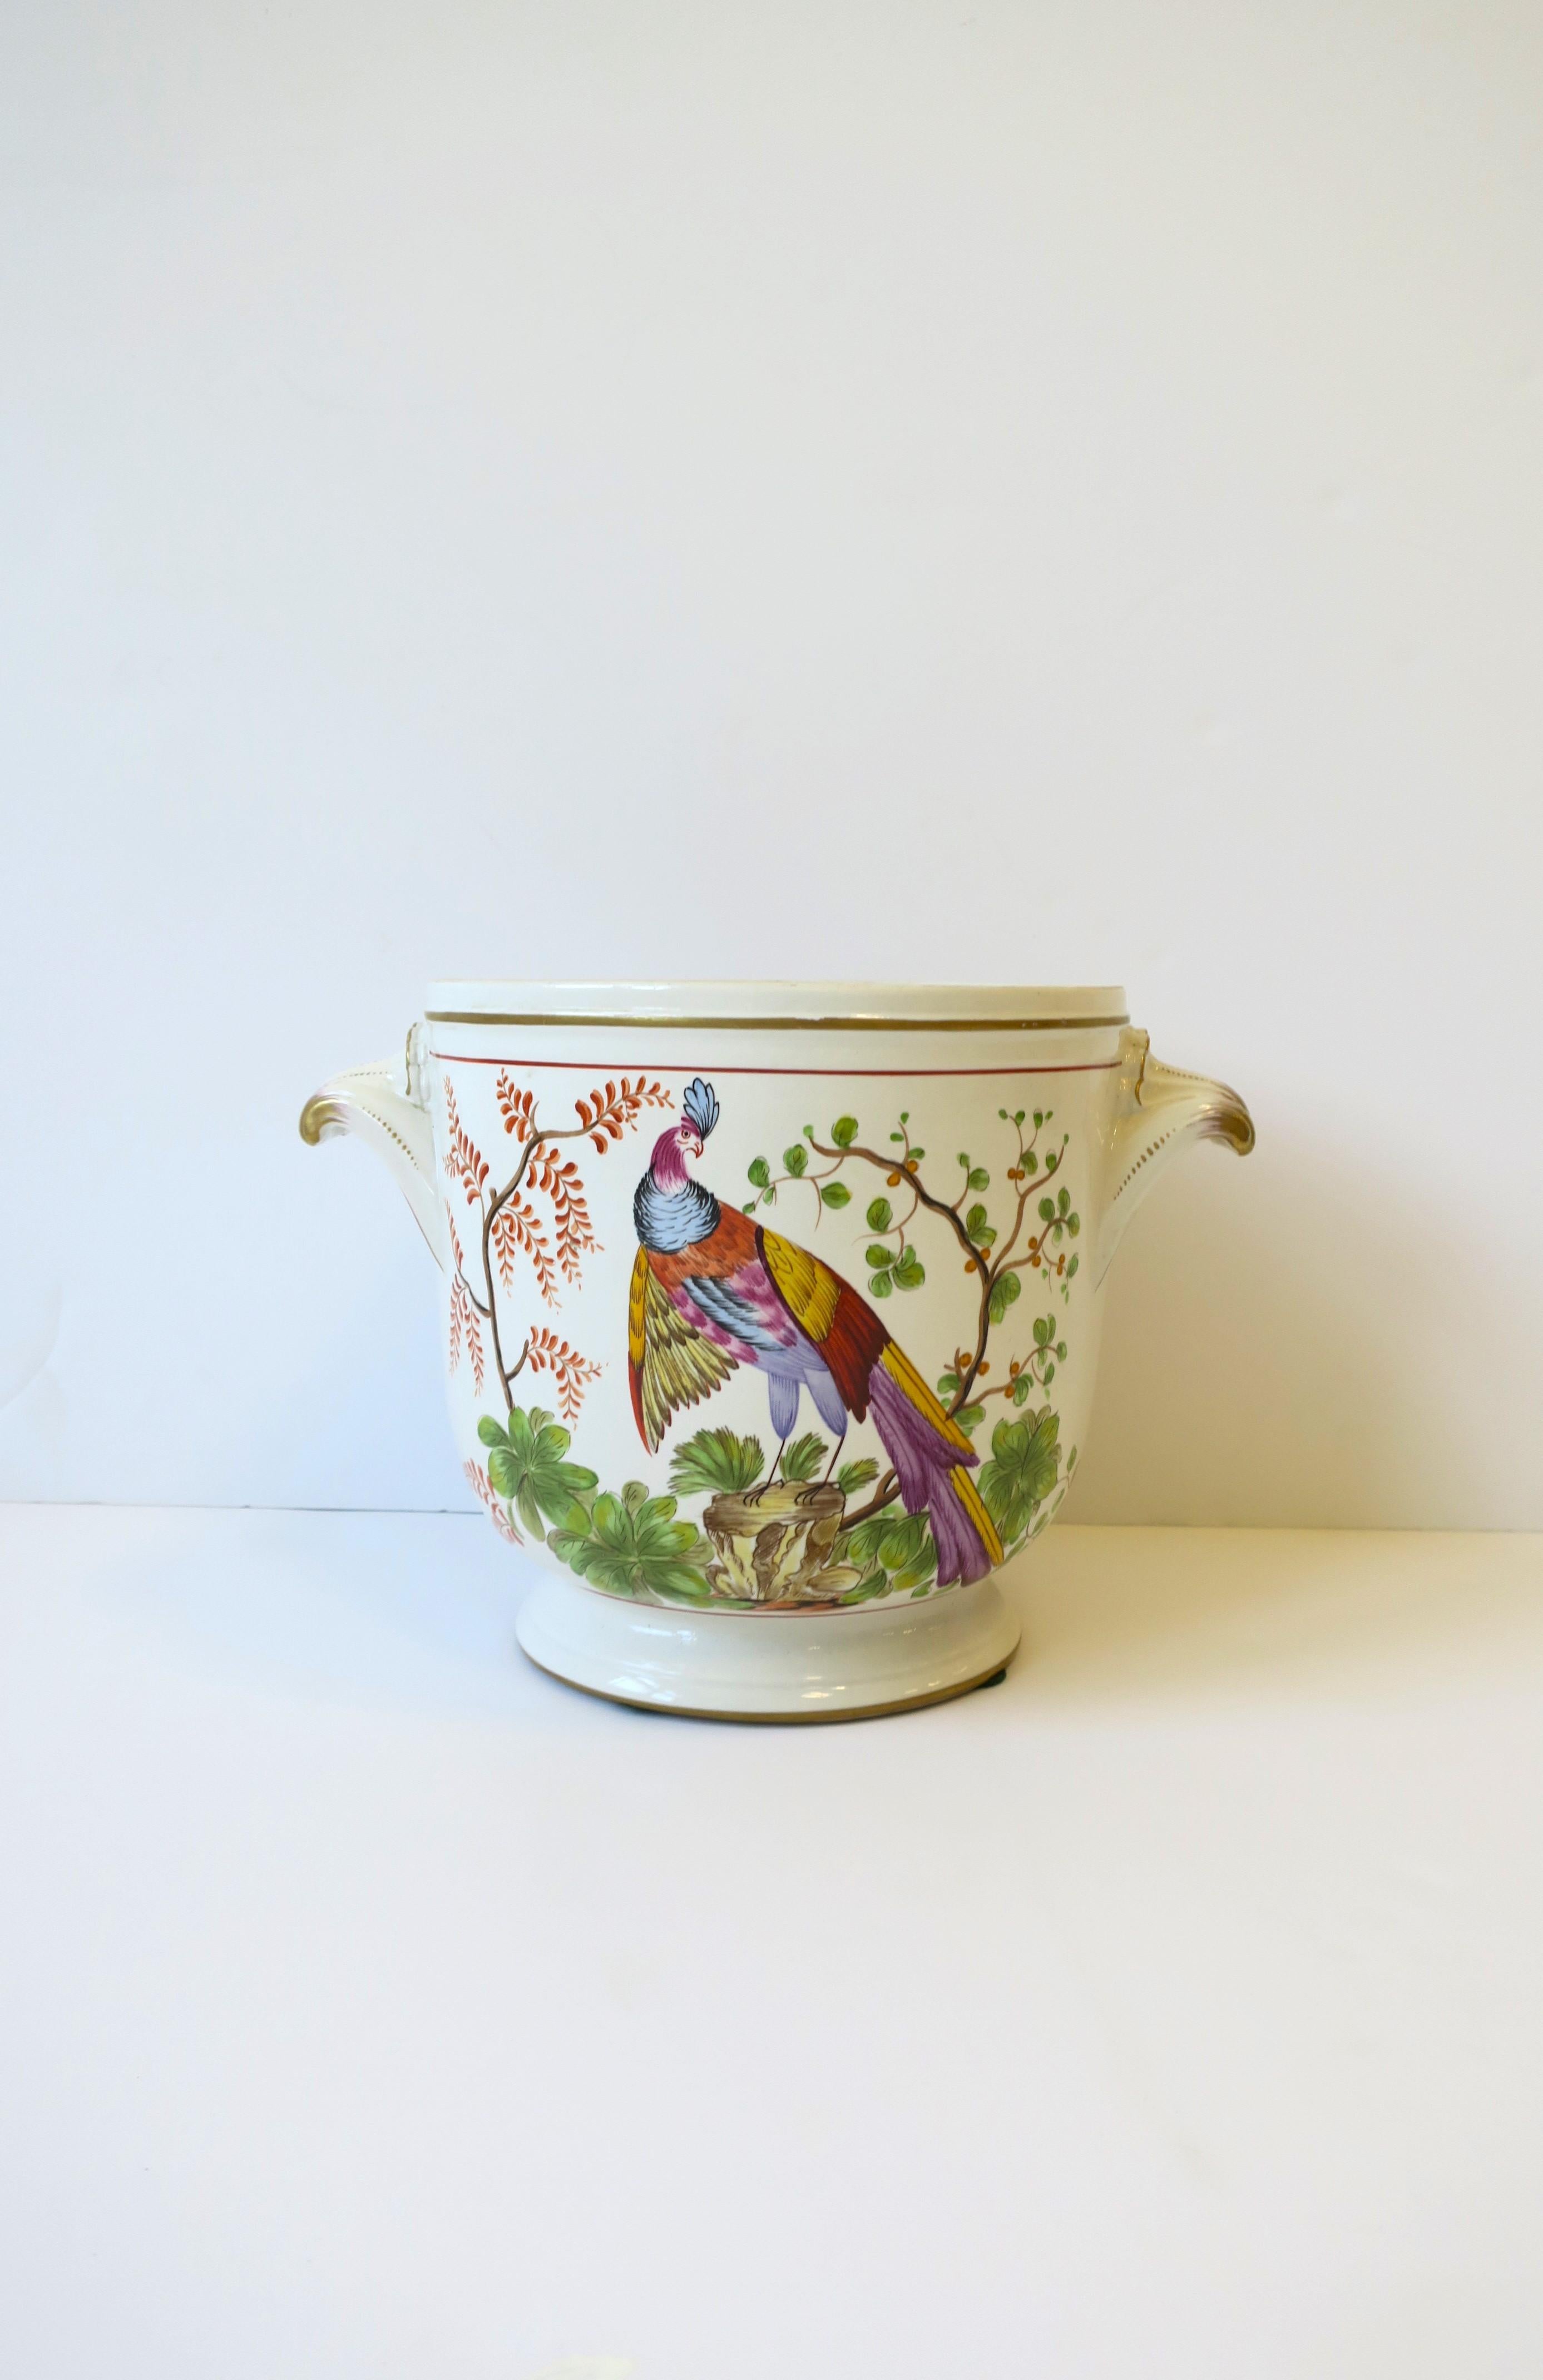 A beautiful Italian flower or plant potholder planter cachepot jardinière with peacock bird by Mottahedeh, circa mid-20th century, Italy. Pot is cream off-white ceramic with prominent colorful peacock bird on front, garden foliage on back, and